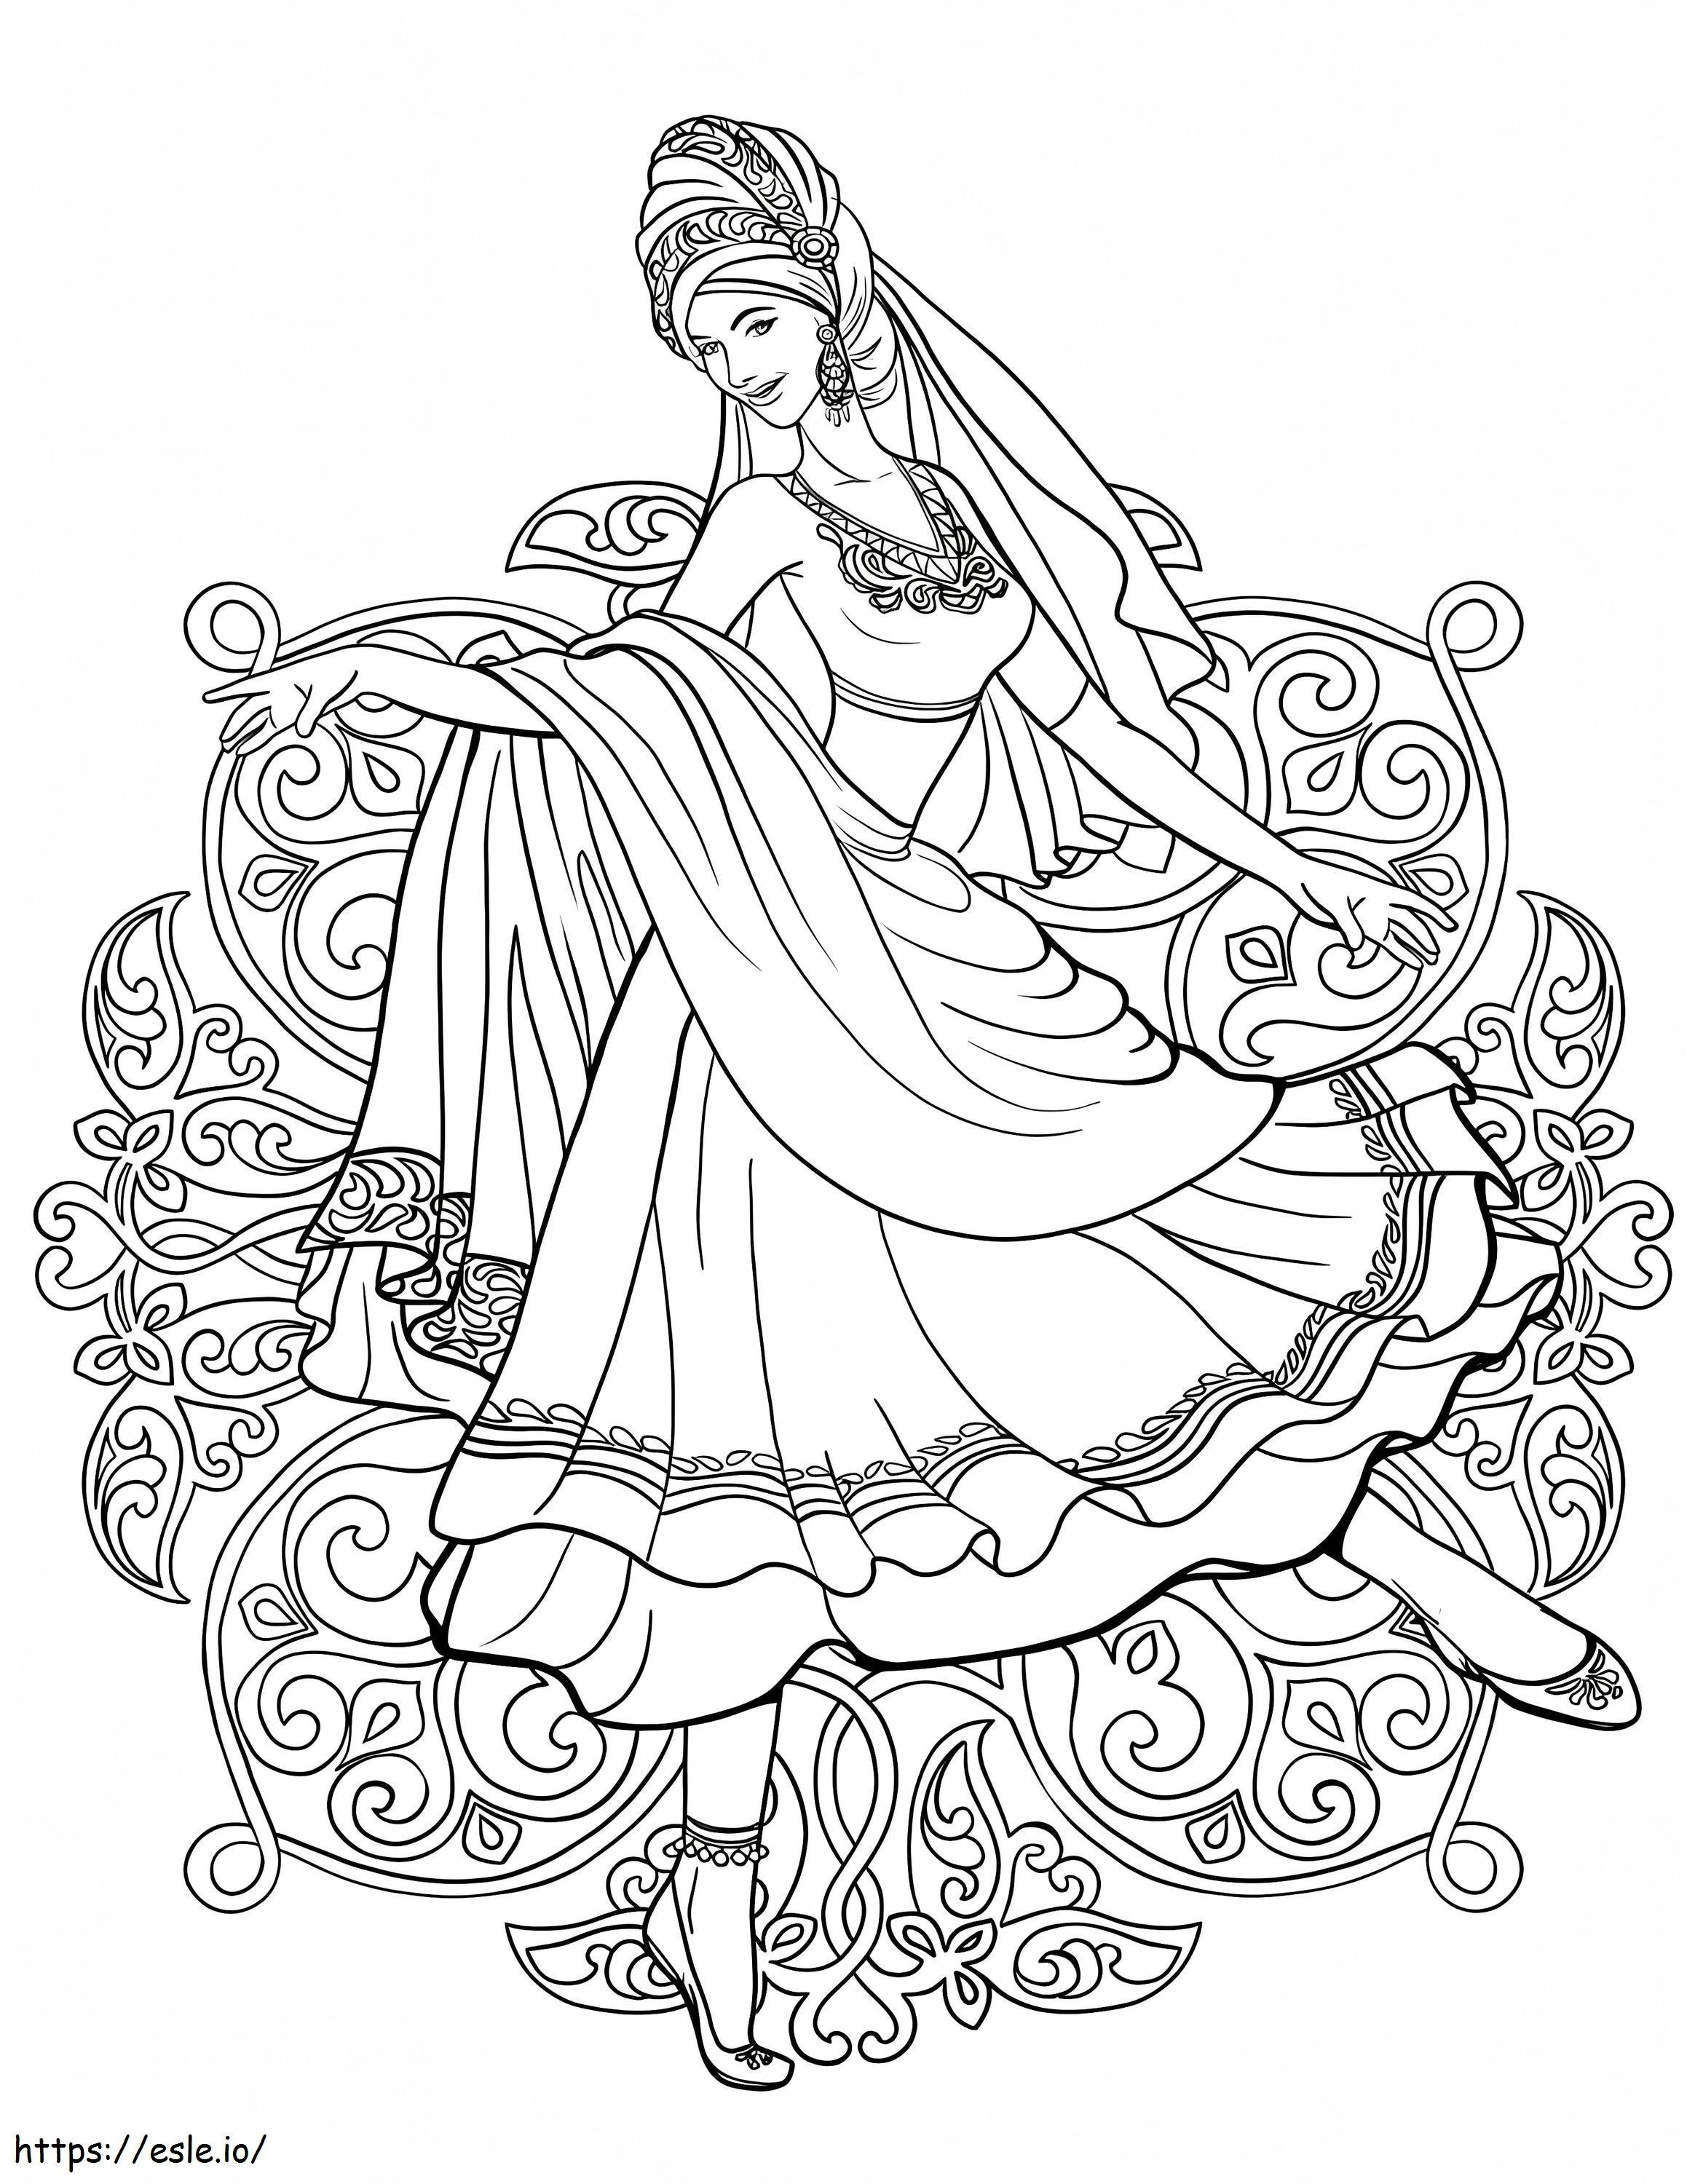 Indian Woman Dancing coloring page